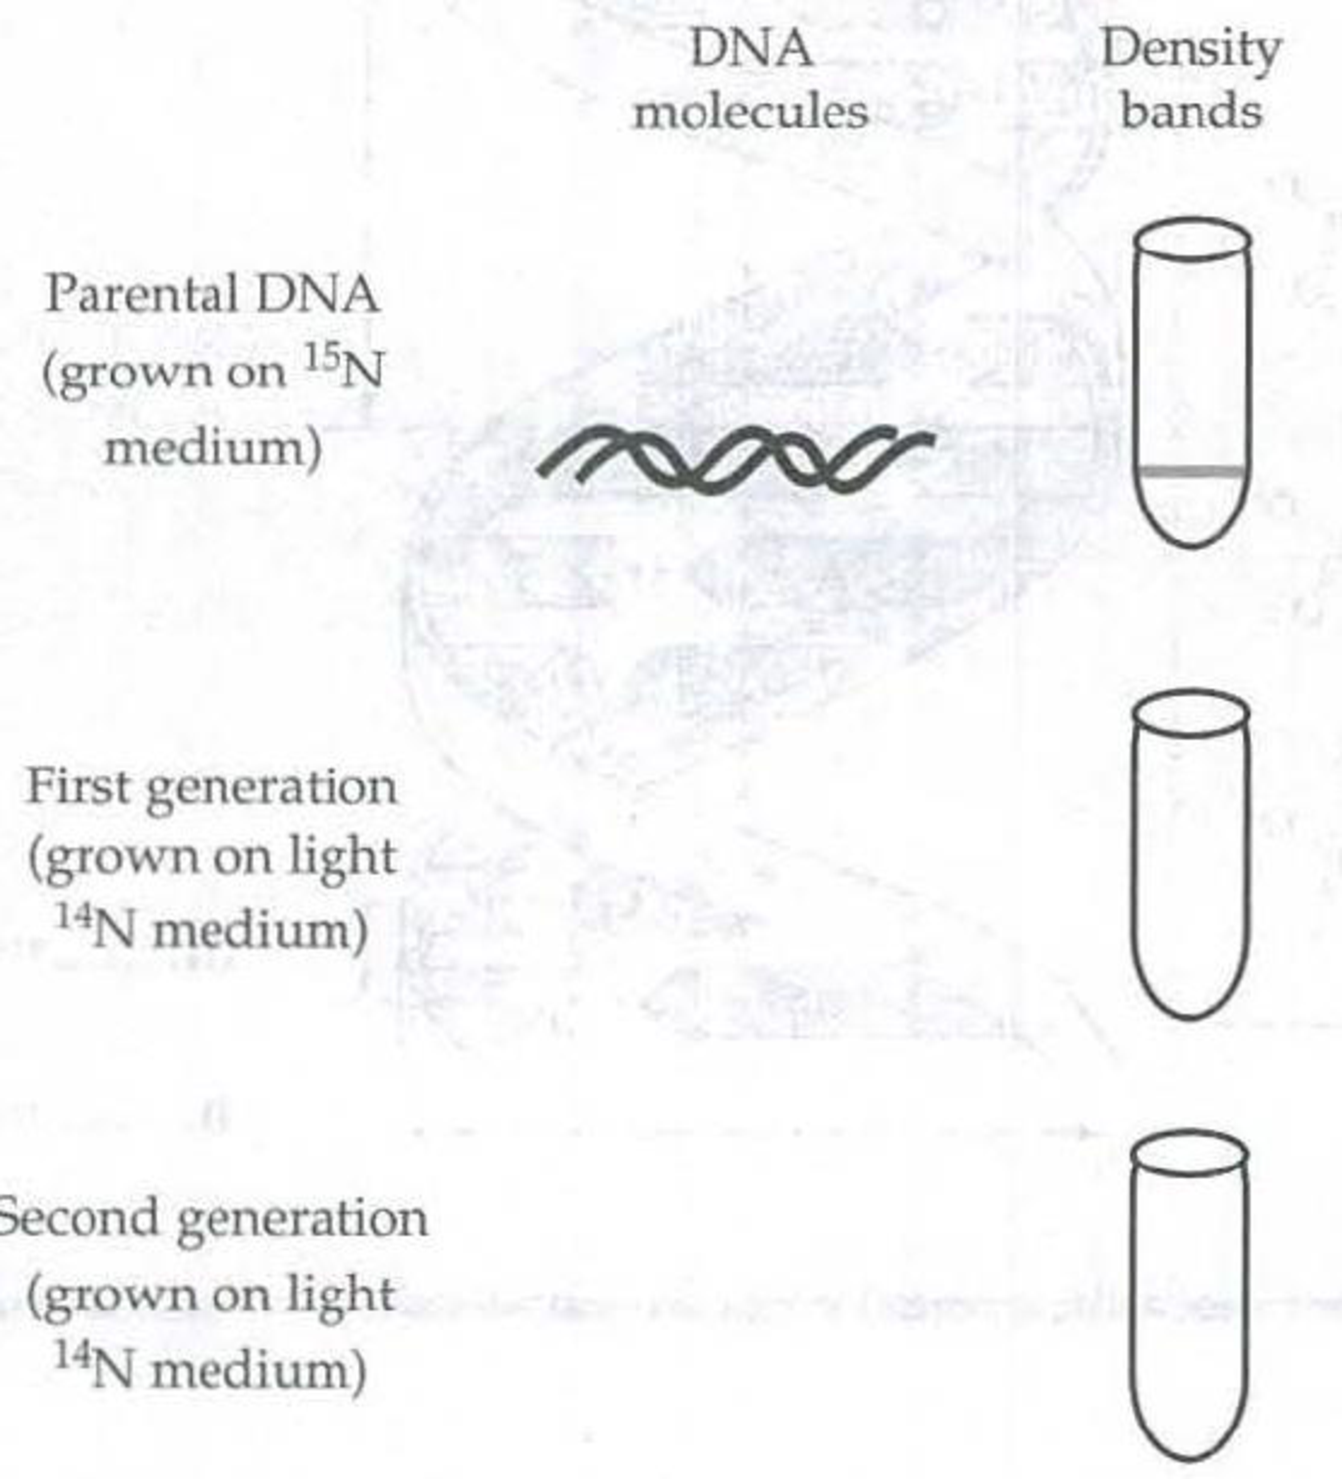 Chapter 16, Problem 3IQ, Using different colors for heavy (parental) and light (new) strands of DNA, sketch the DNA molecules 